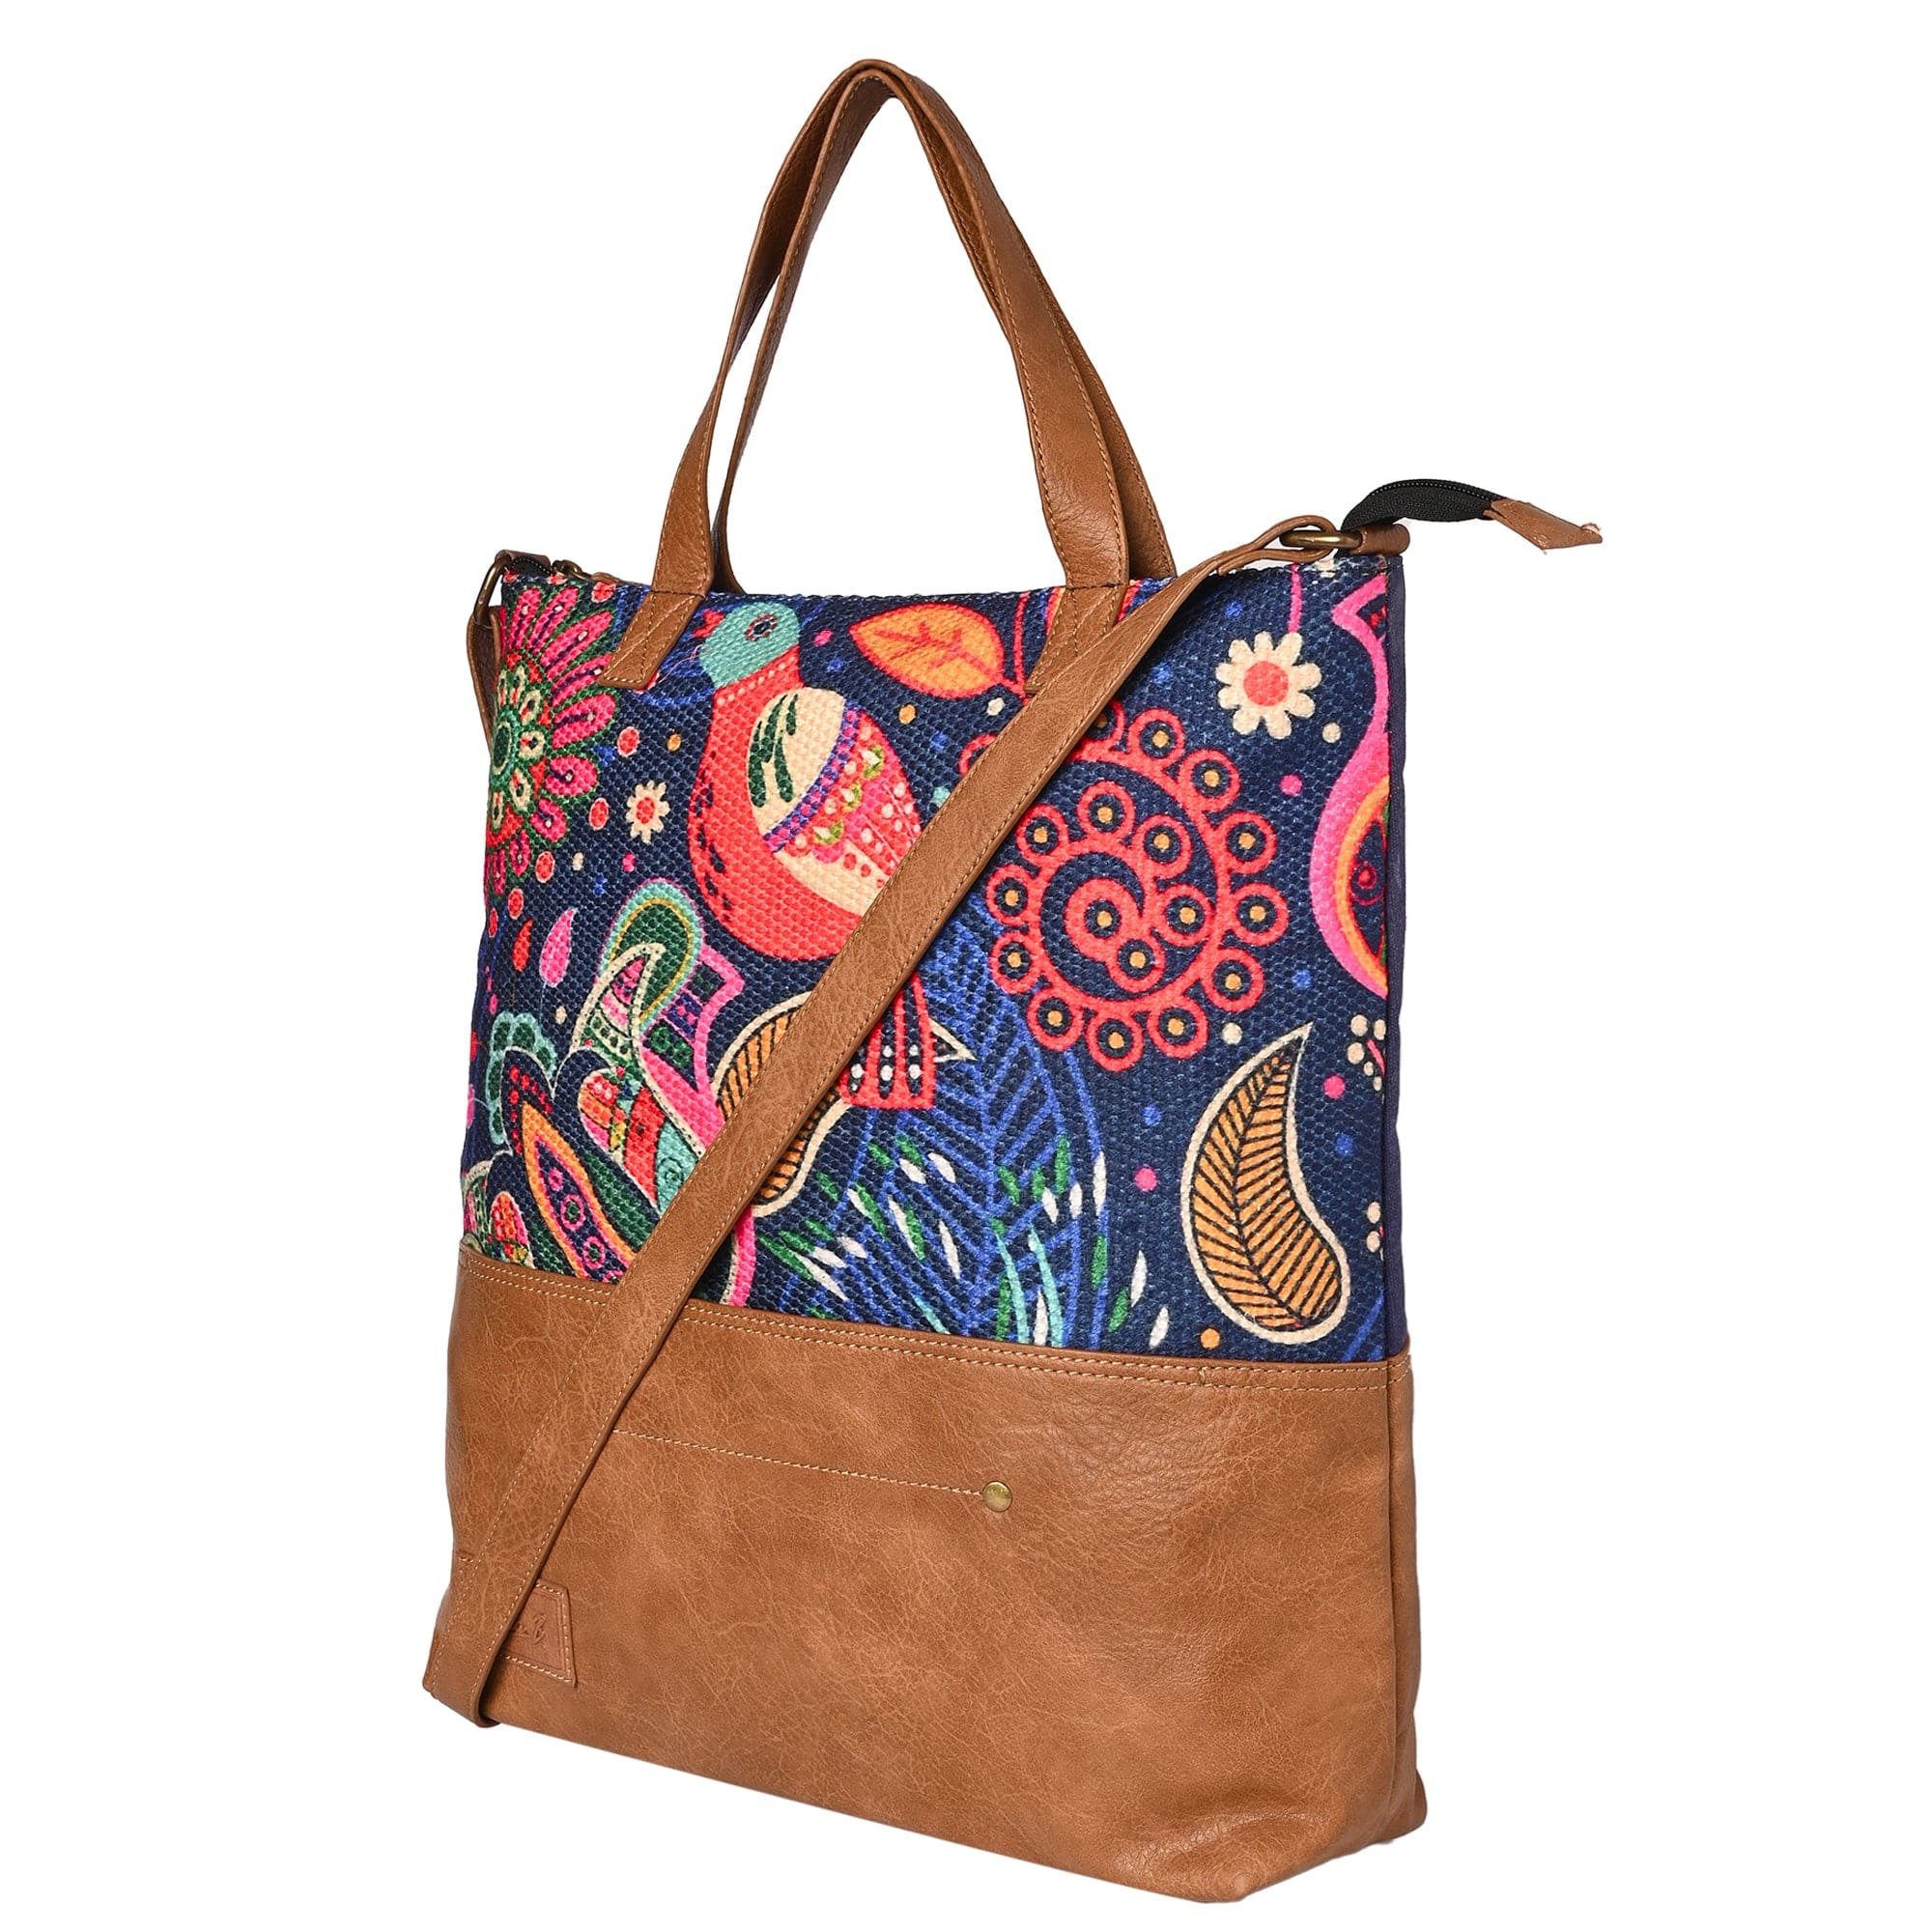 Mona-B Bag Mona B Oasis Tote with Laptop Compartment